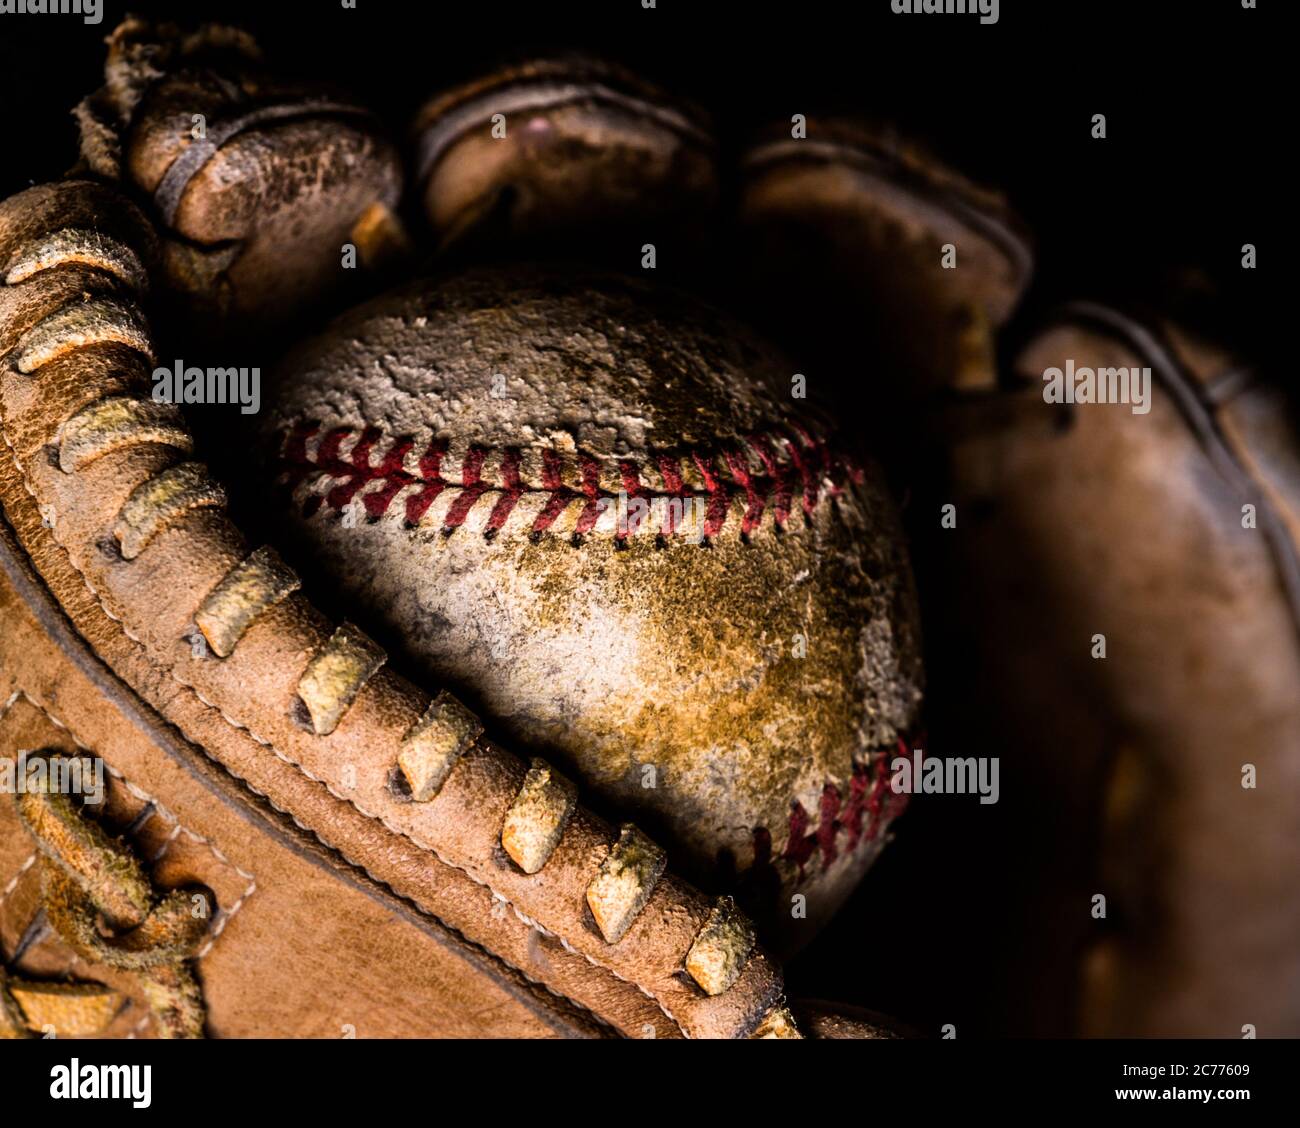 Basball caught just in the end of an old leather glove, lit from the side. Stock Photo